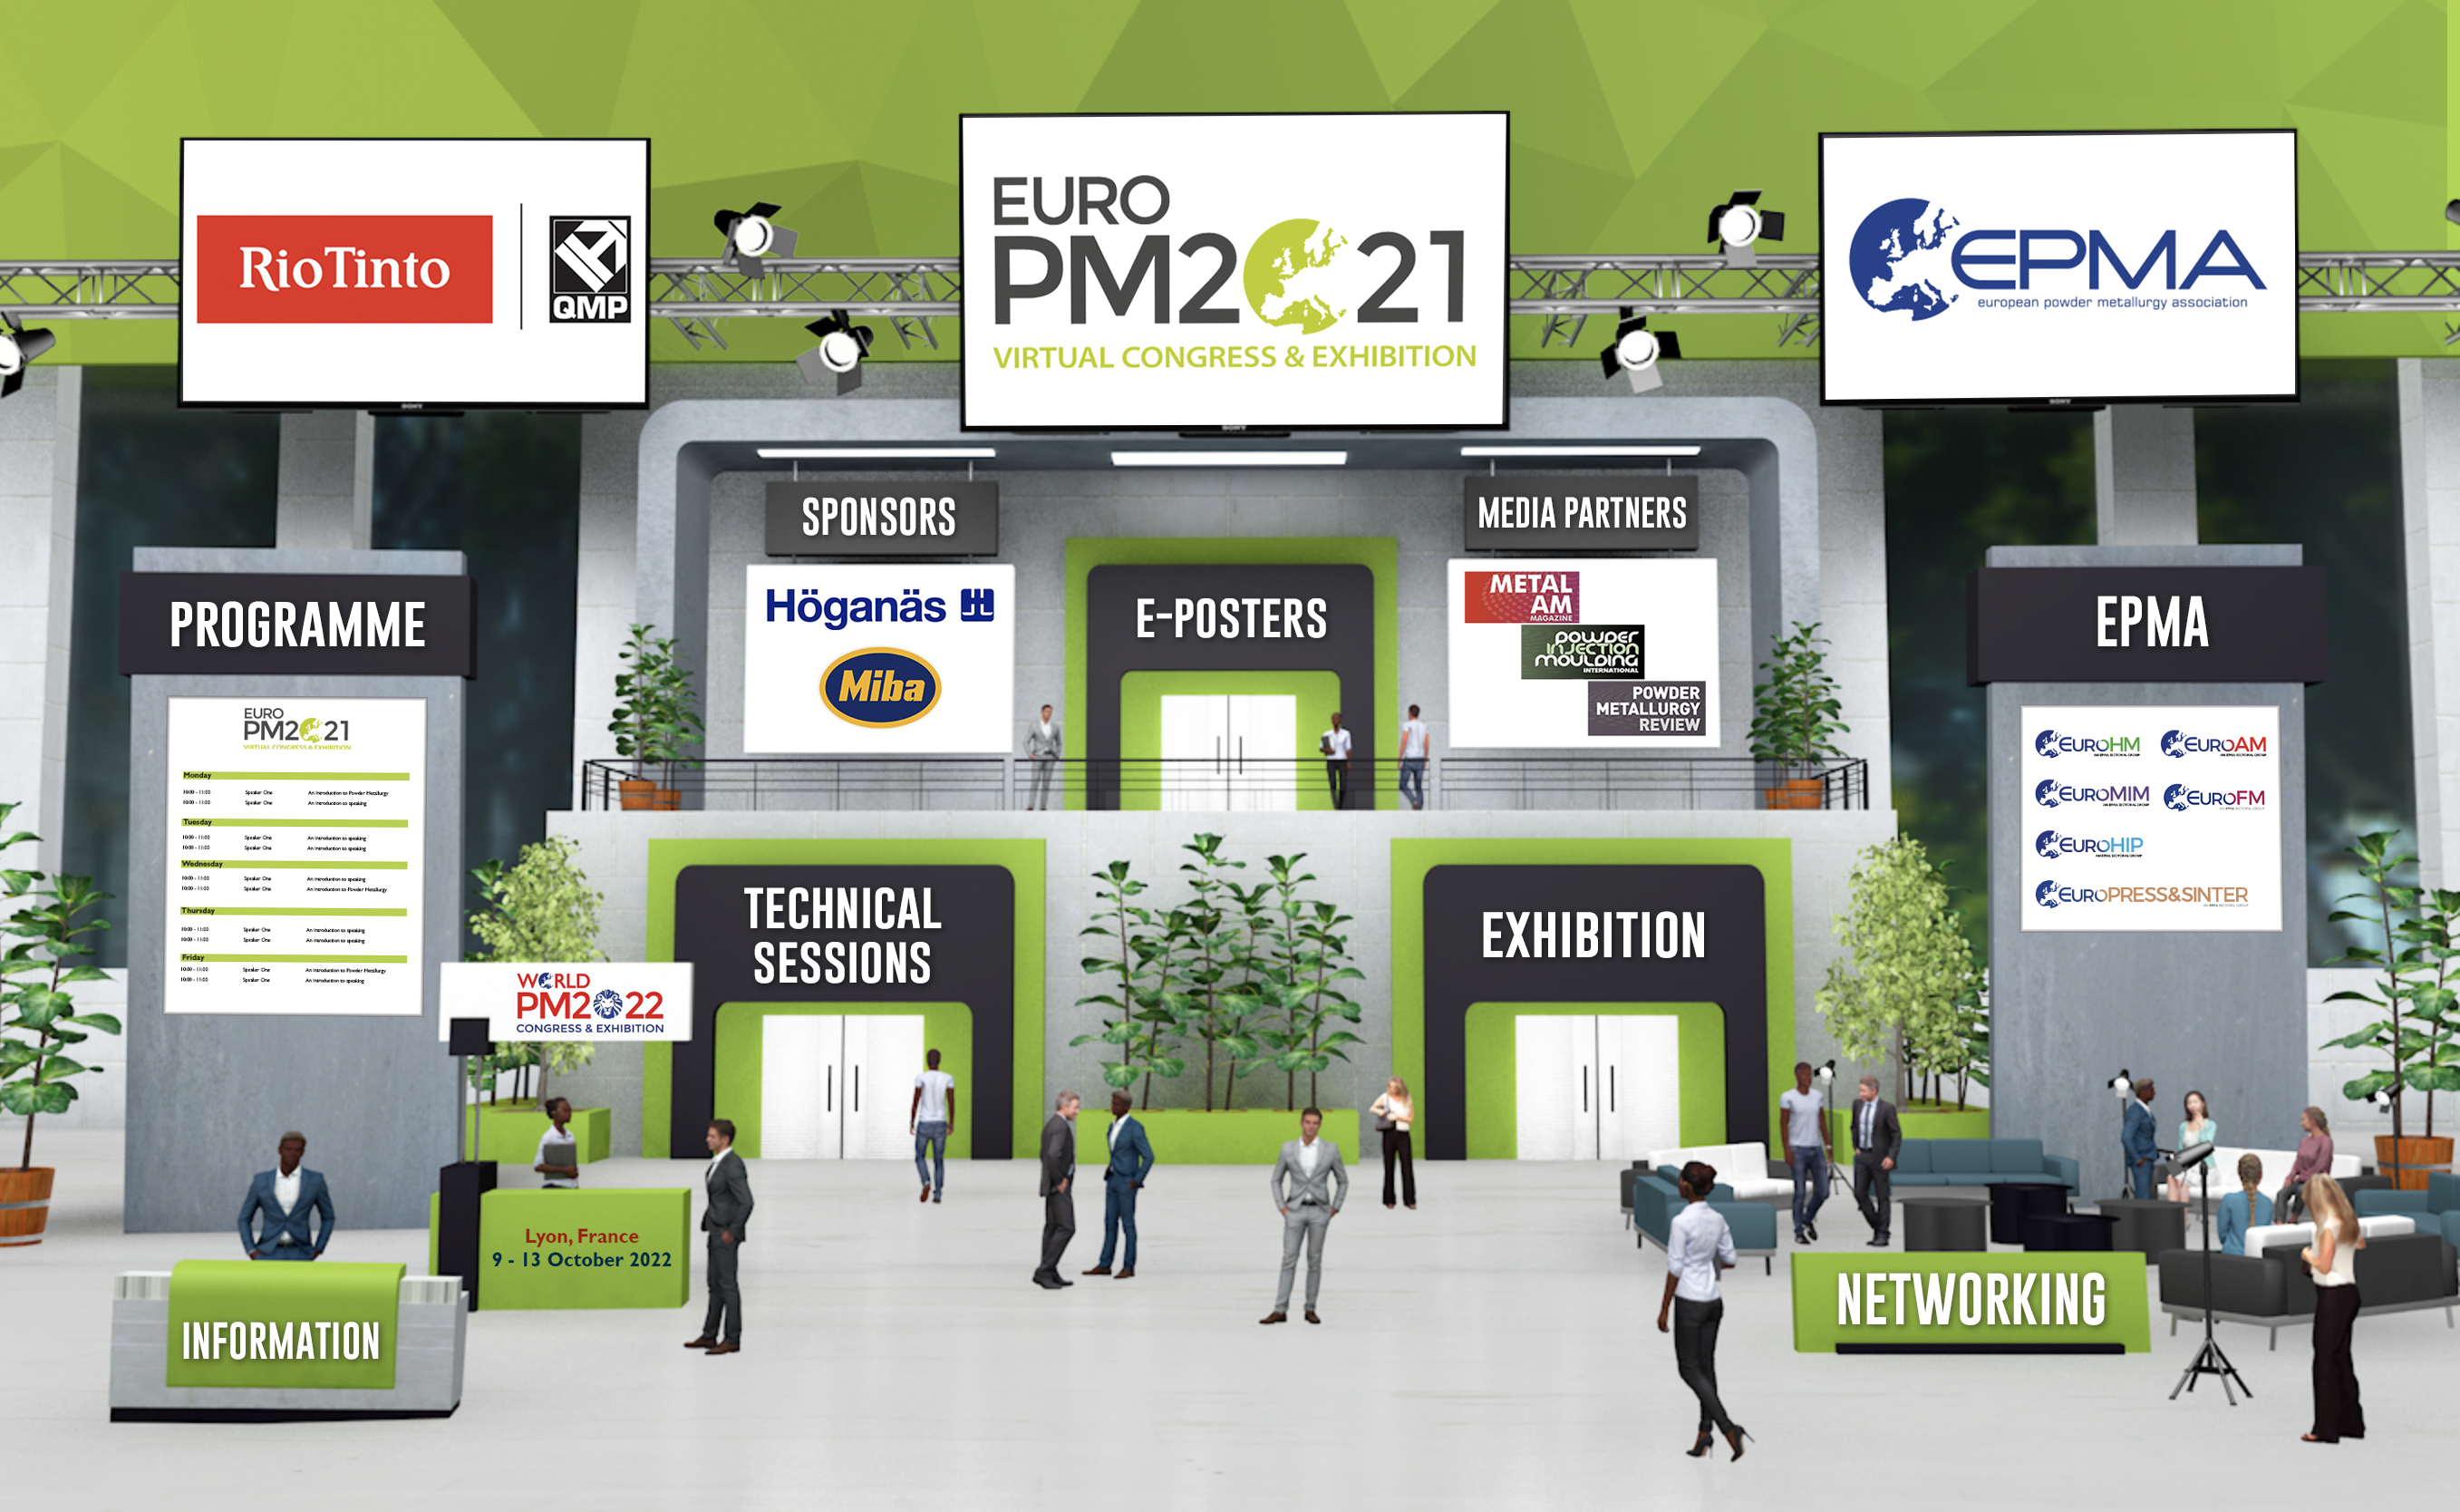 The conference included a virtual PM exhibition featuring 30 booths.